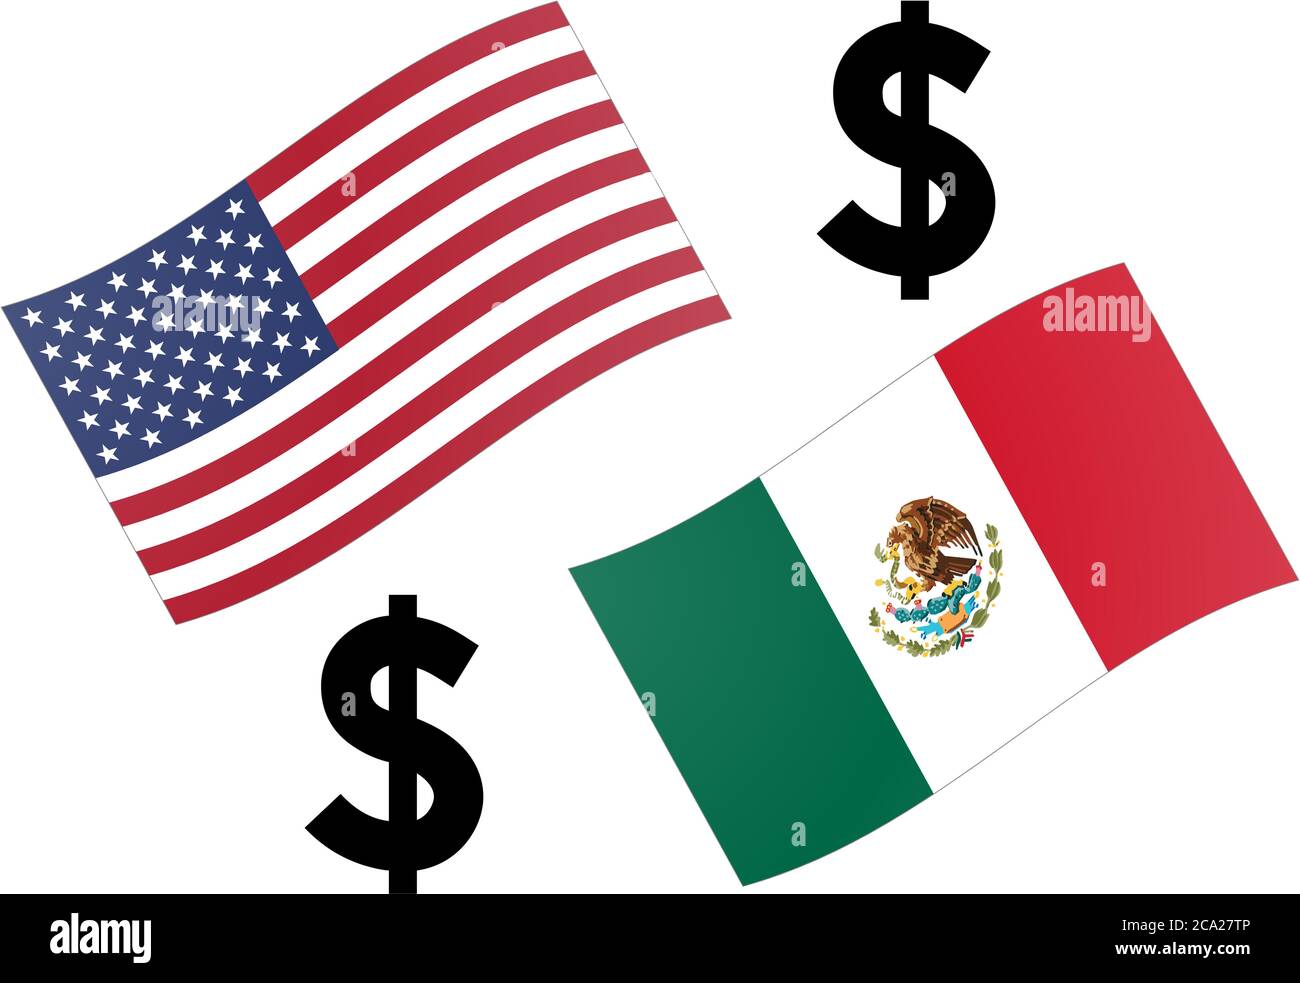 USDMXN forex currency pair vector illustration. American and Mexican flag, with Dollar symbol. Stock Vector